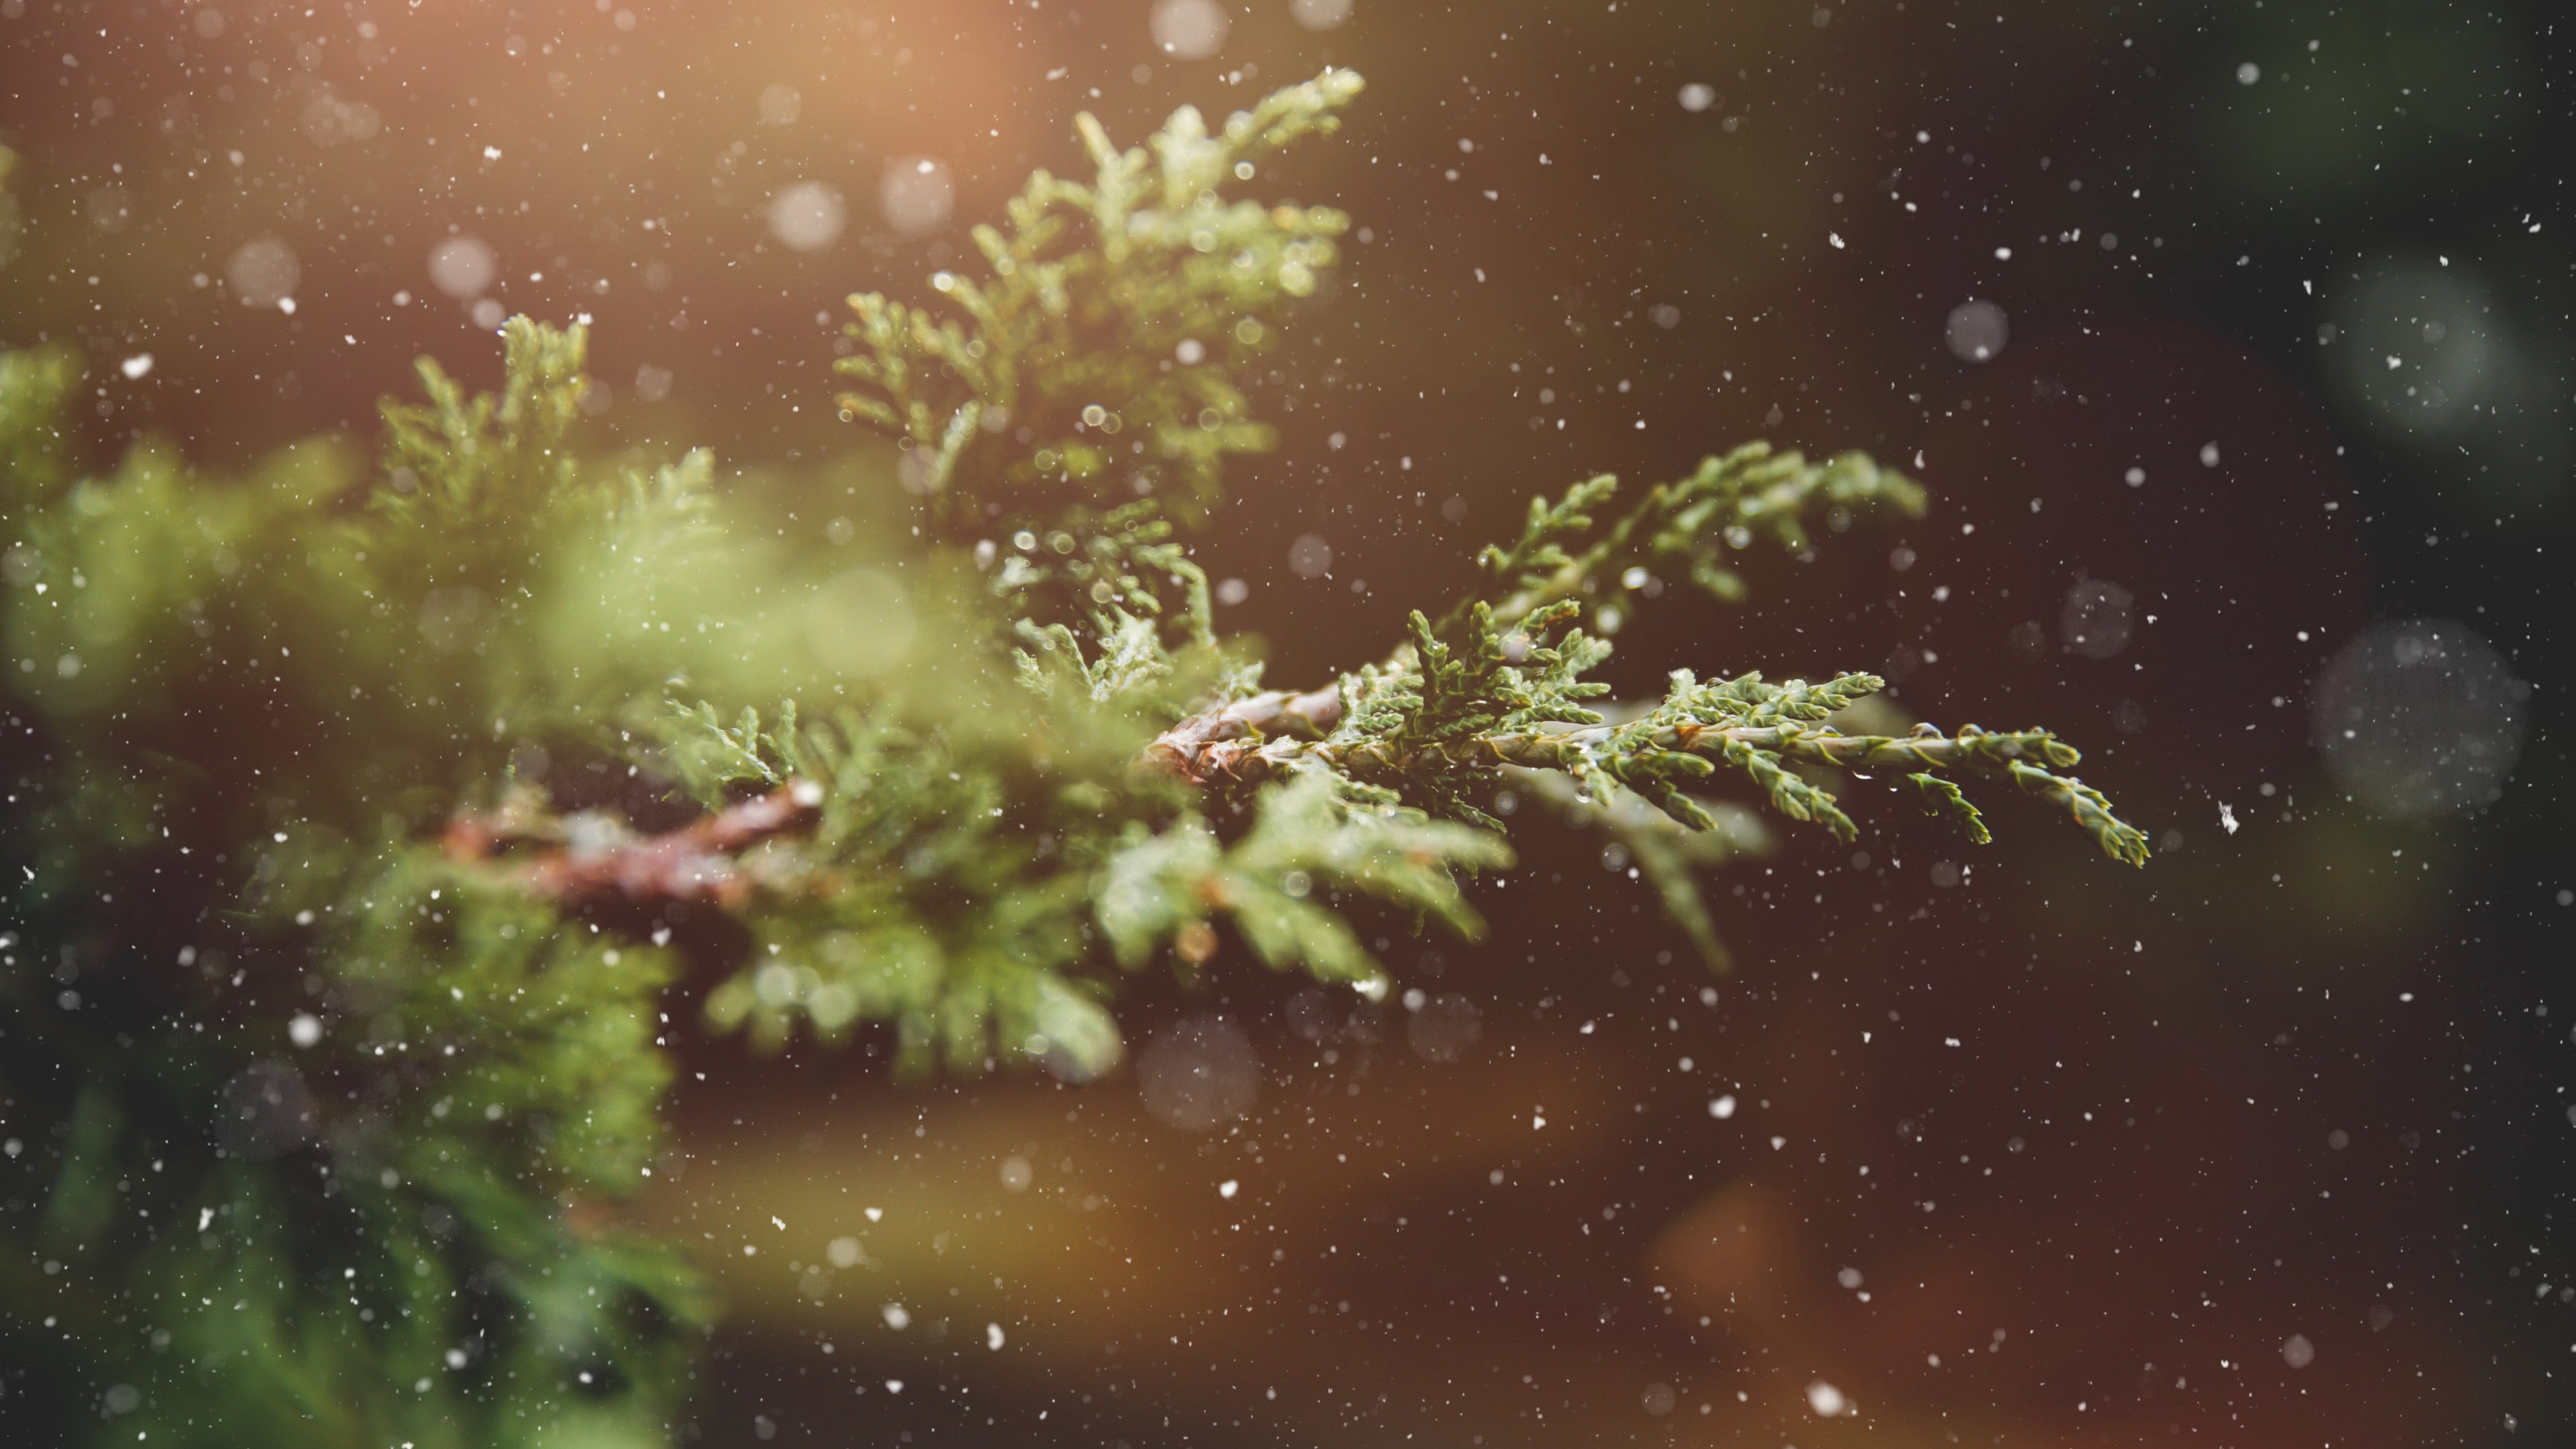 Snowflakes over the pine branch wallpaper 2880x1620